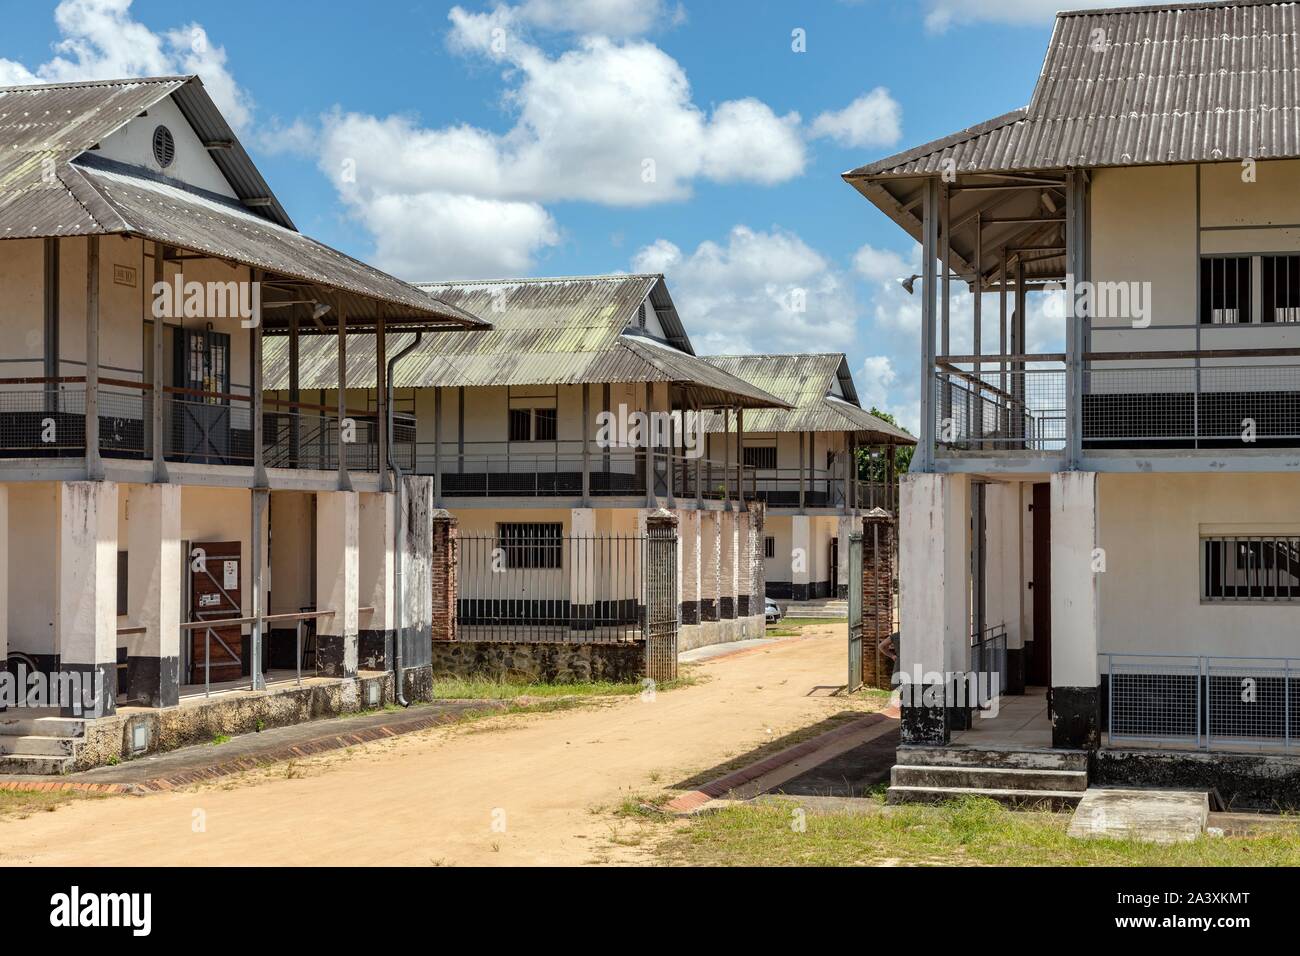 BUNKHOUSE AT THE TRANSPORTATION CAMP, SAINT-LAURENT DU MARONI, FRENCH GUIANA, OVERSEAS DEPARTMENT, SOUTH AMERICA, FRANCE Stock Photo